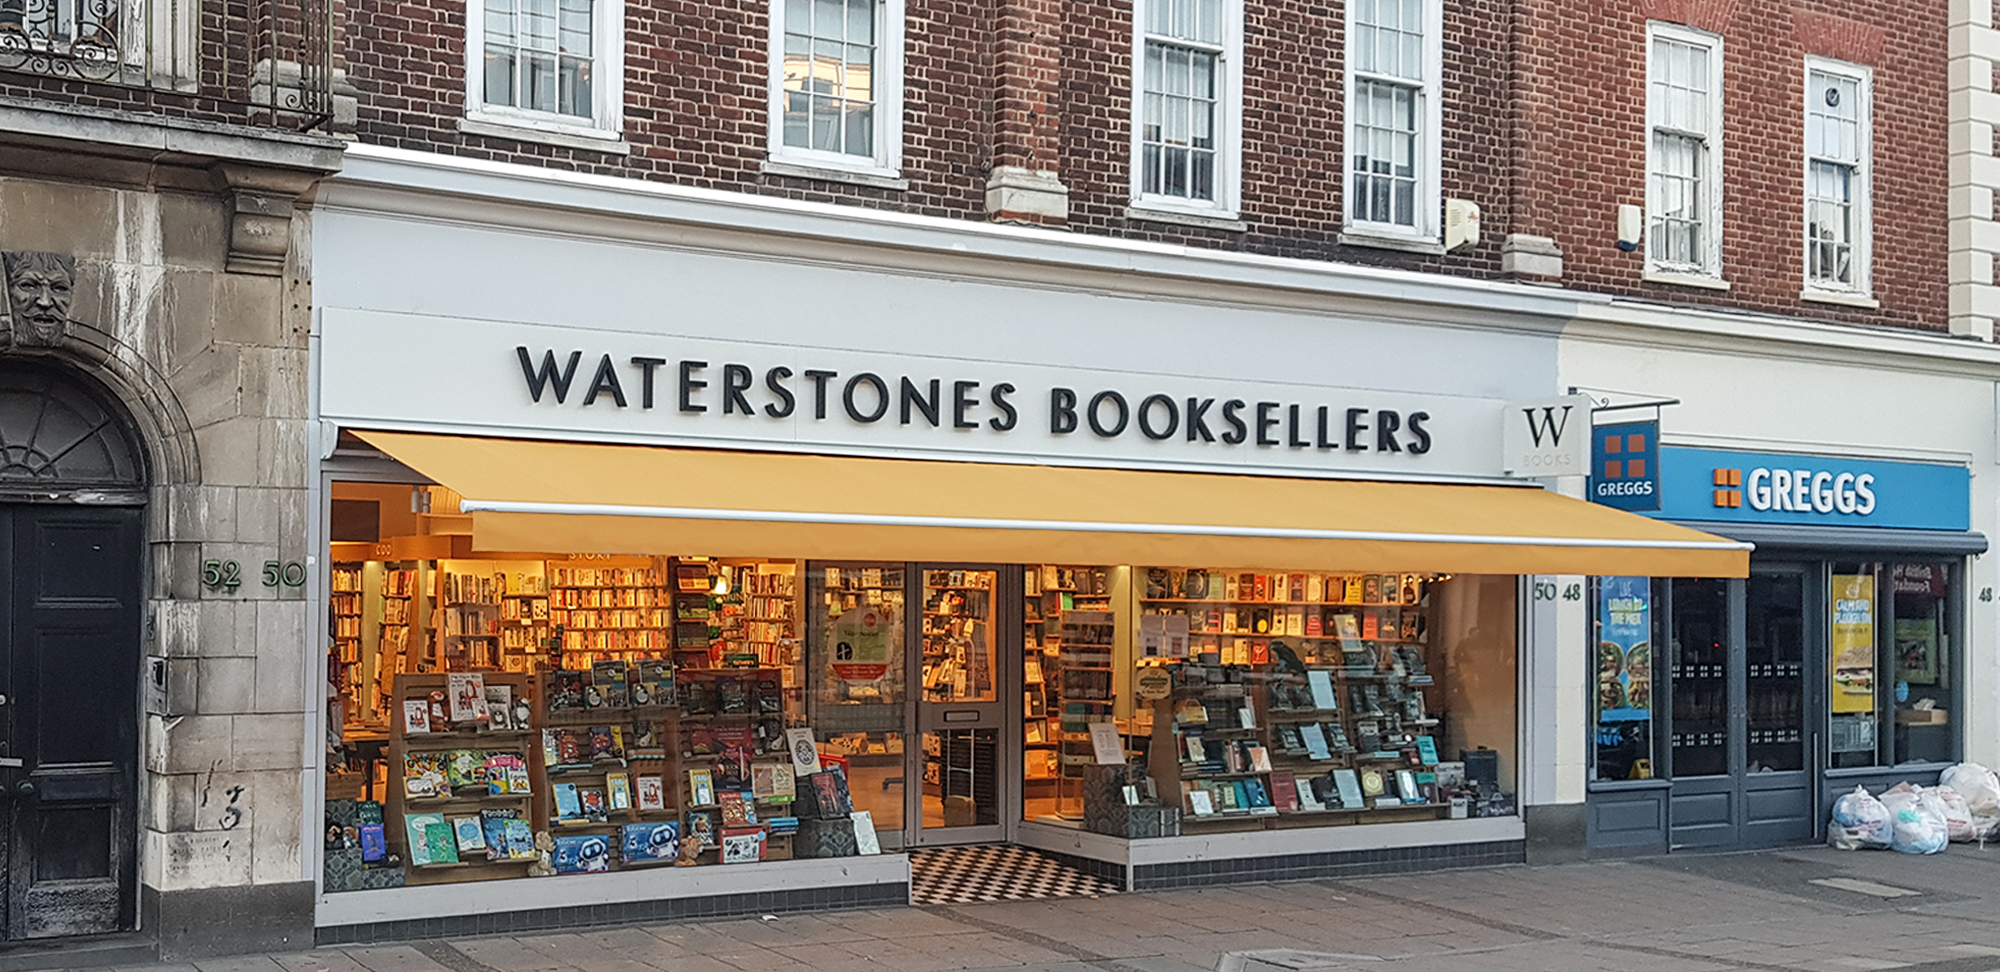 classic awning, waterstones